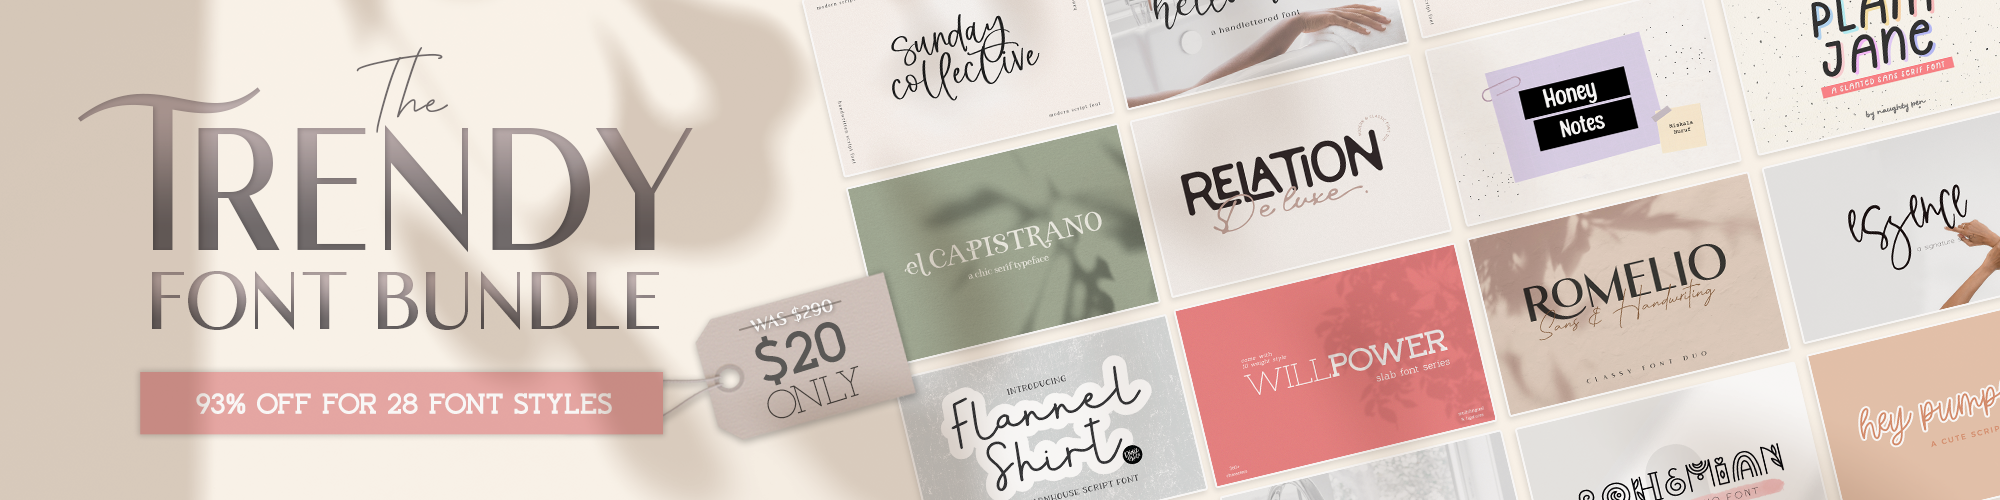 28 New Classy Font Styles in The Trendy Font Bundle